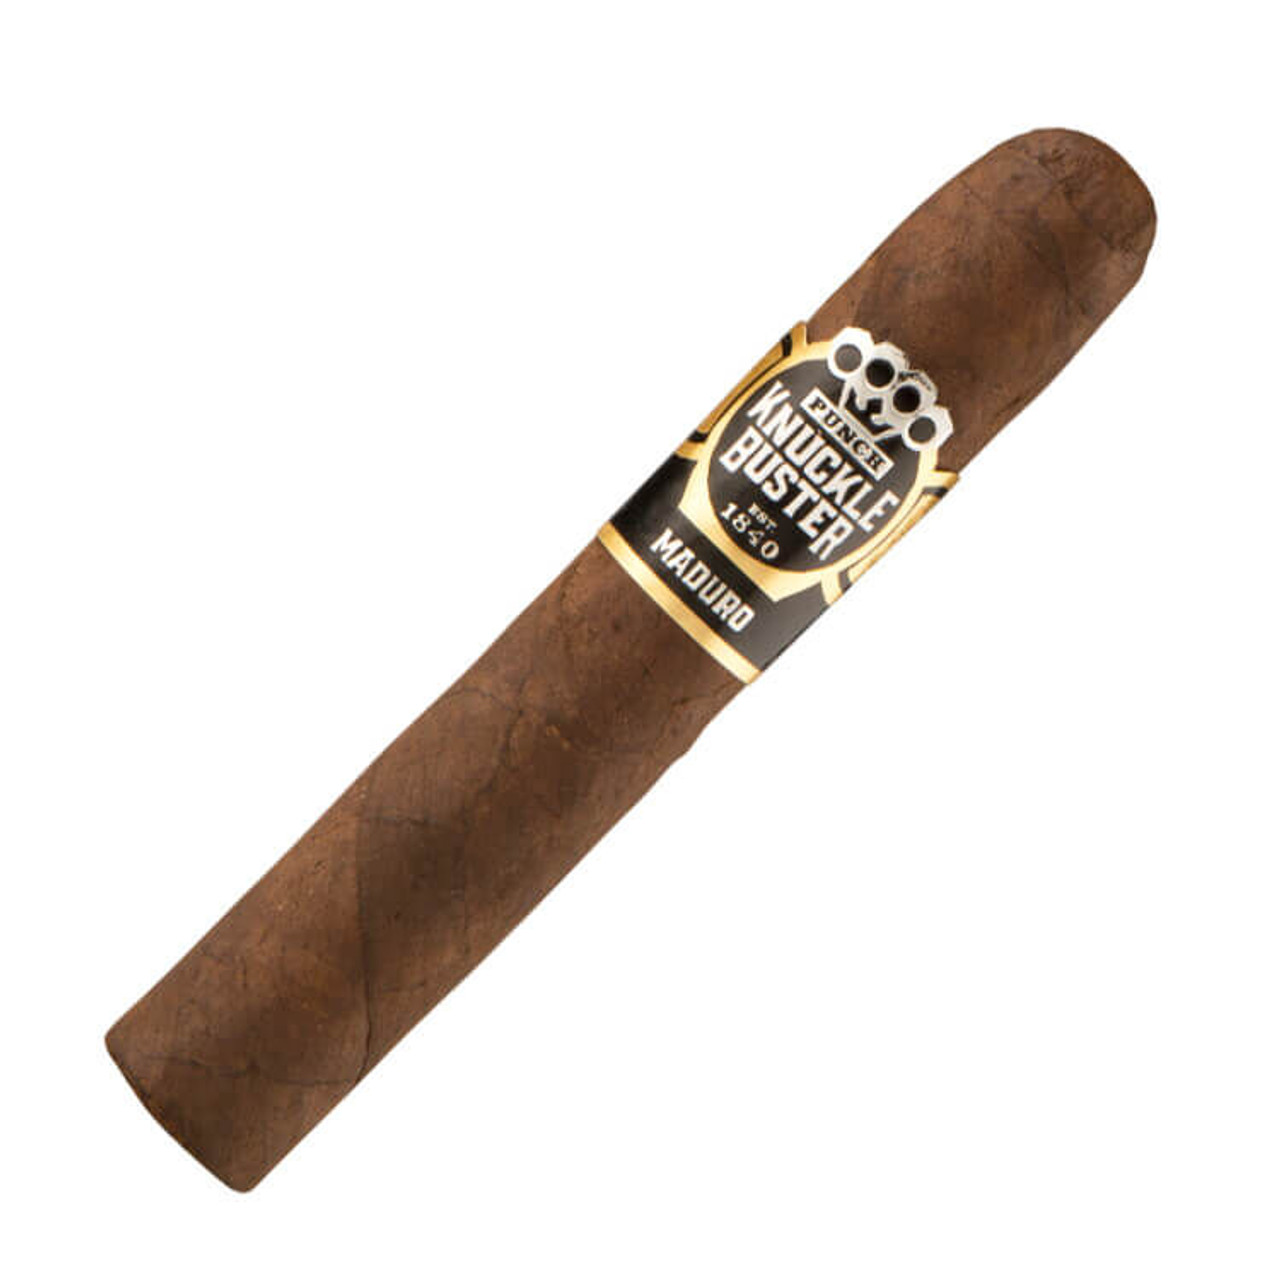 Punch Knuckle Buster Robusto Maduro Cigars - 4.5 x 52 Single